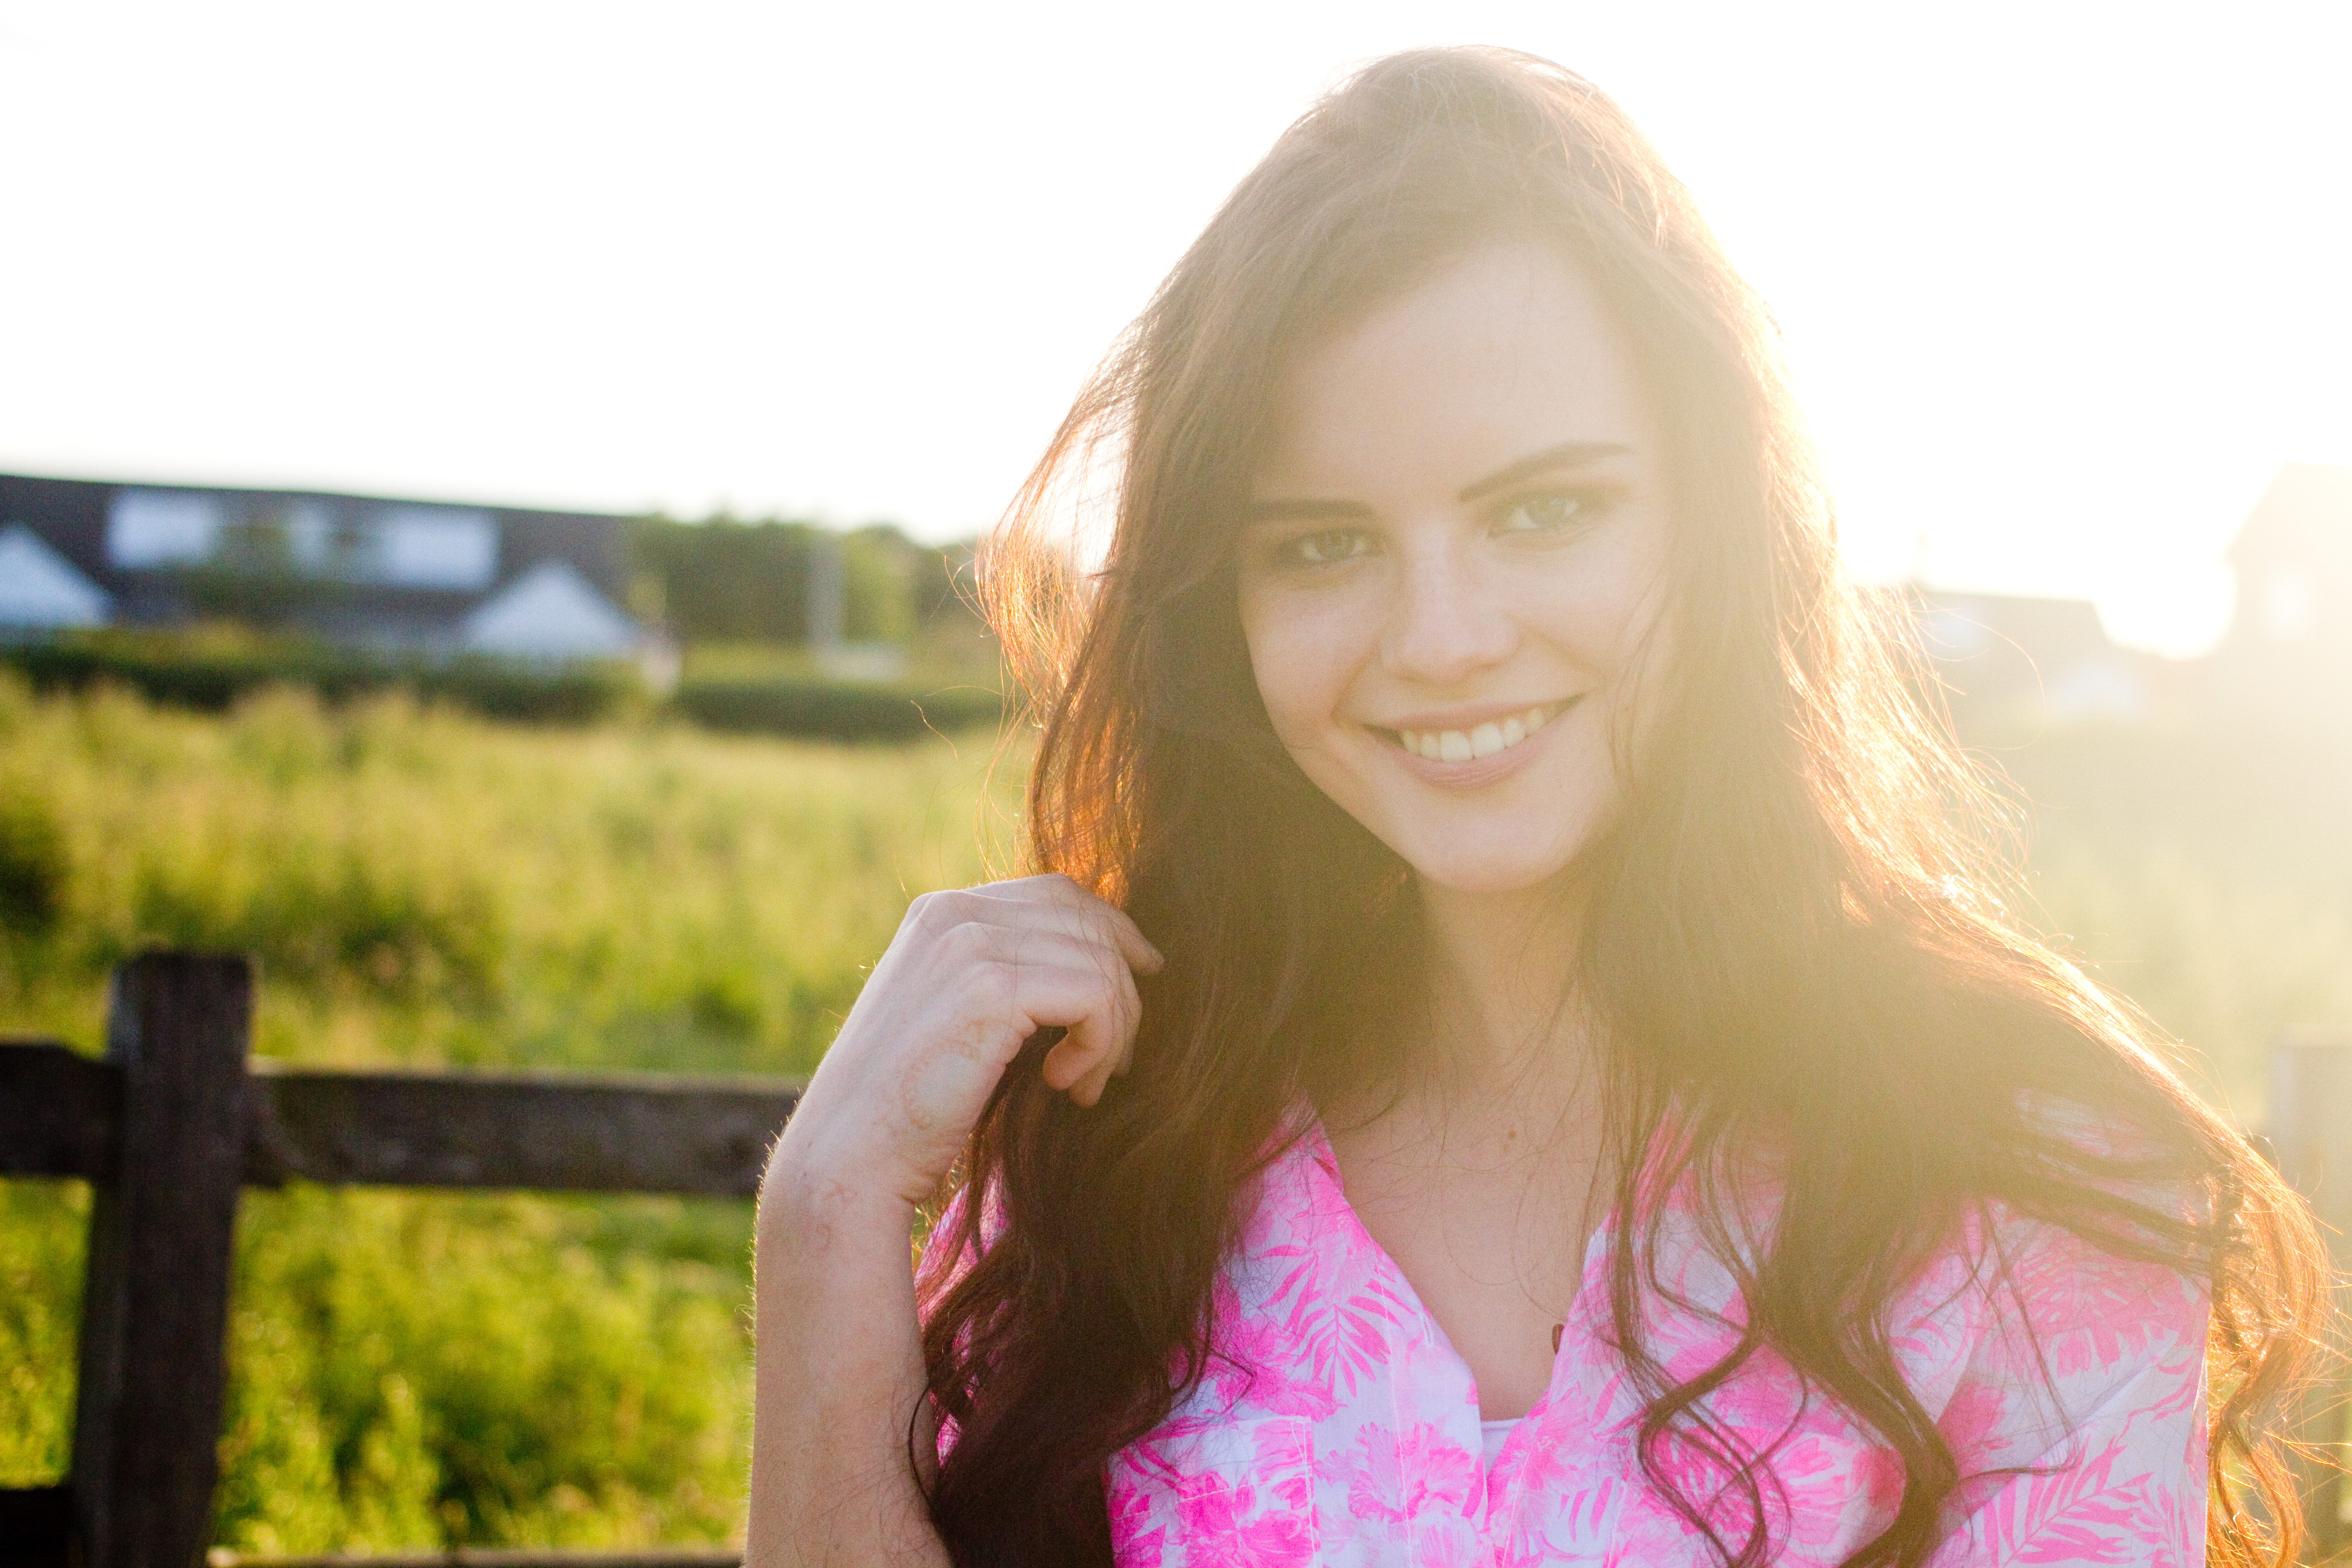 Backlit portrait of teen girl wearing bright pink patterned shirt. Green grass and fence in background.